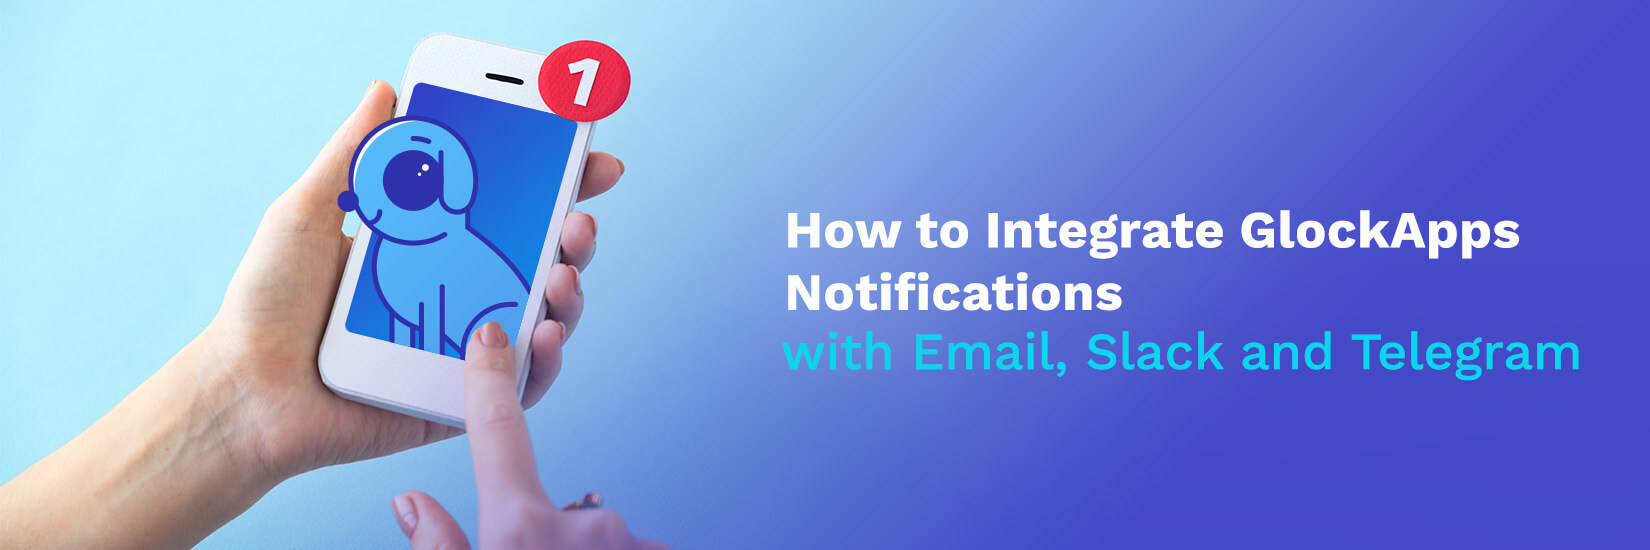 How to Integrate GlockApps Notifications with Email, Slack and Telegram